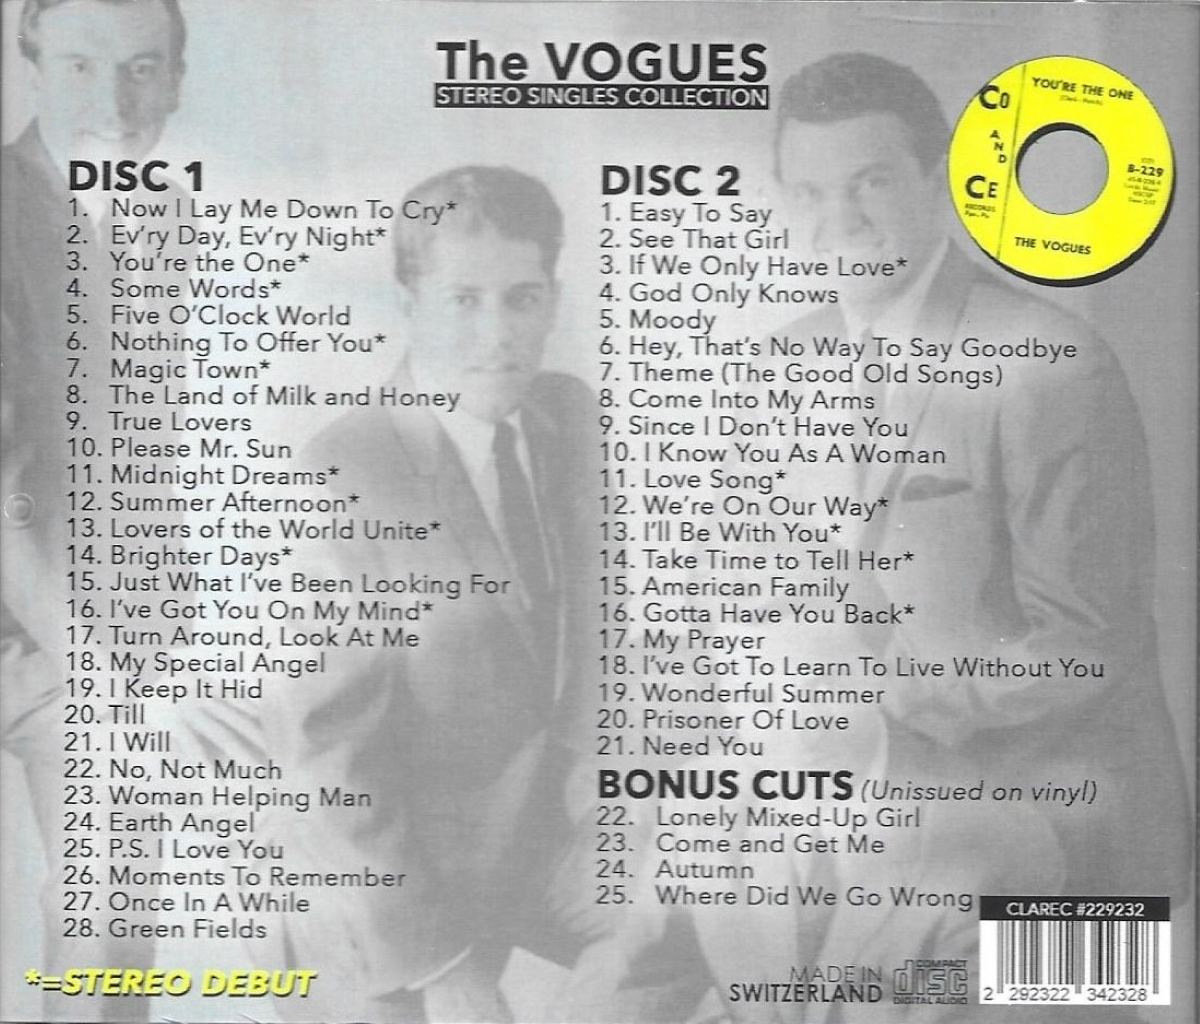 Stereo Singles Collection: 53 Cuts - 17 Stereo Debuts (2 CD)